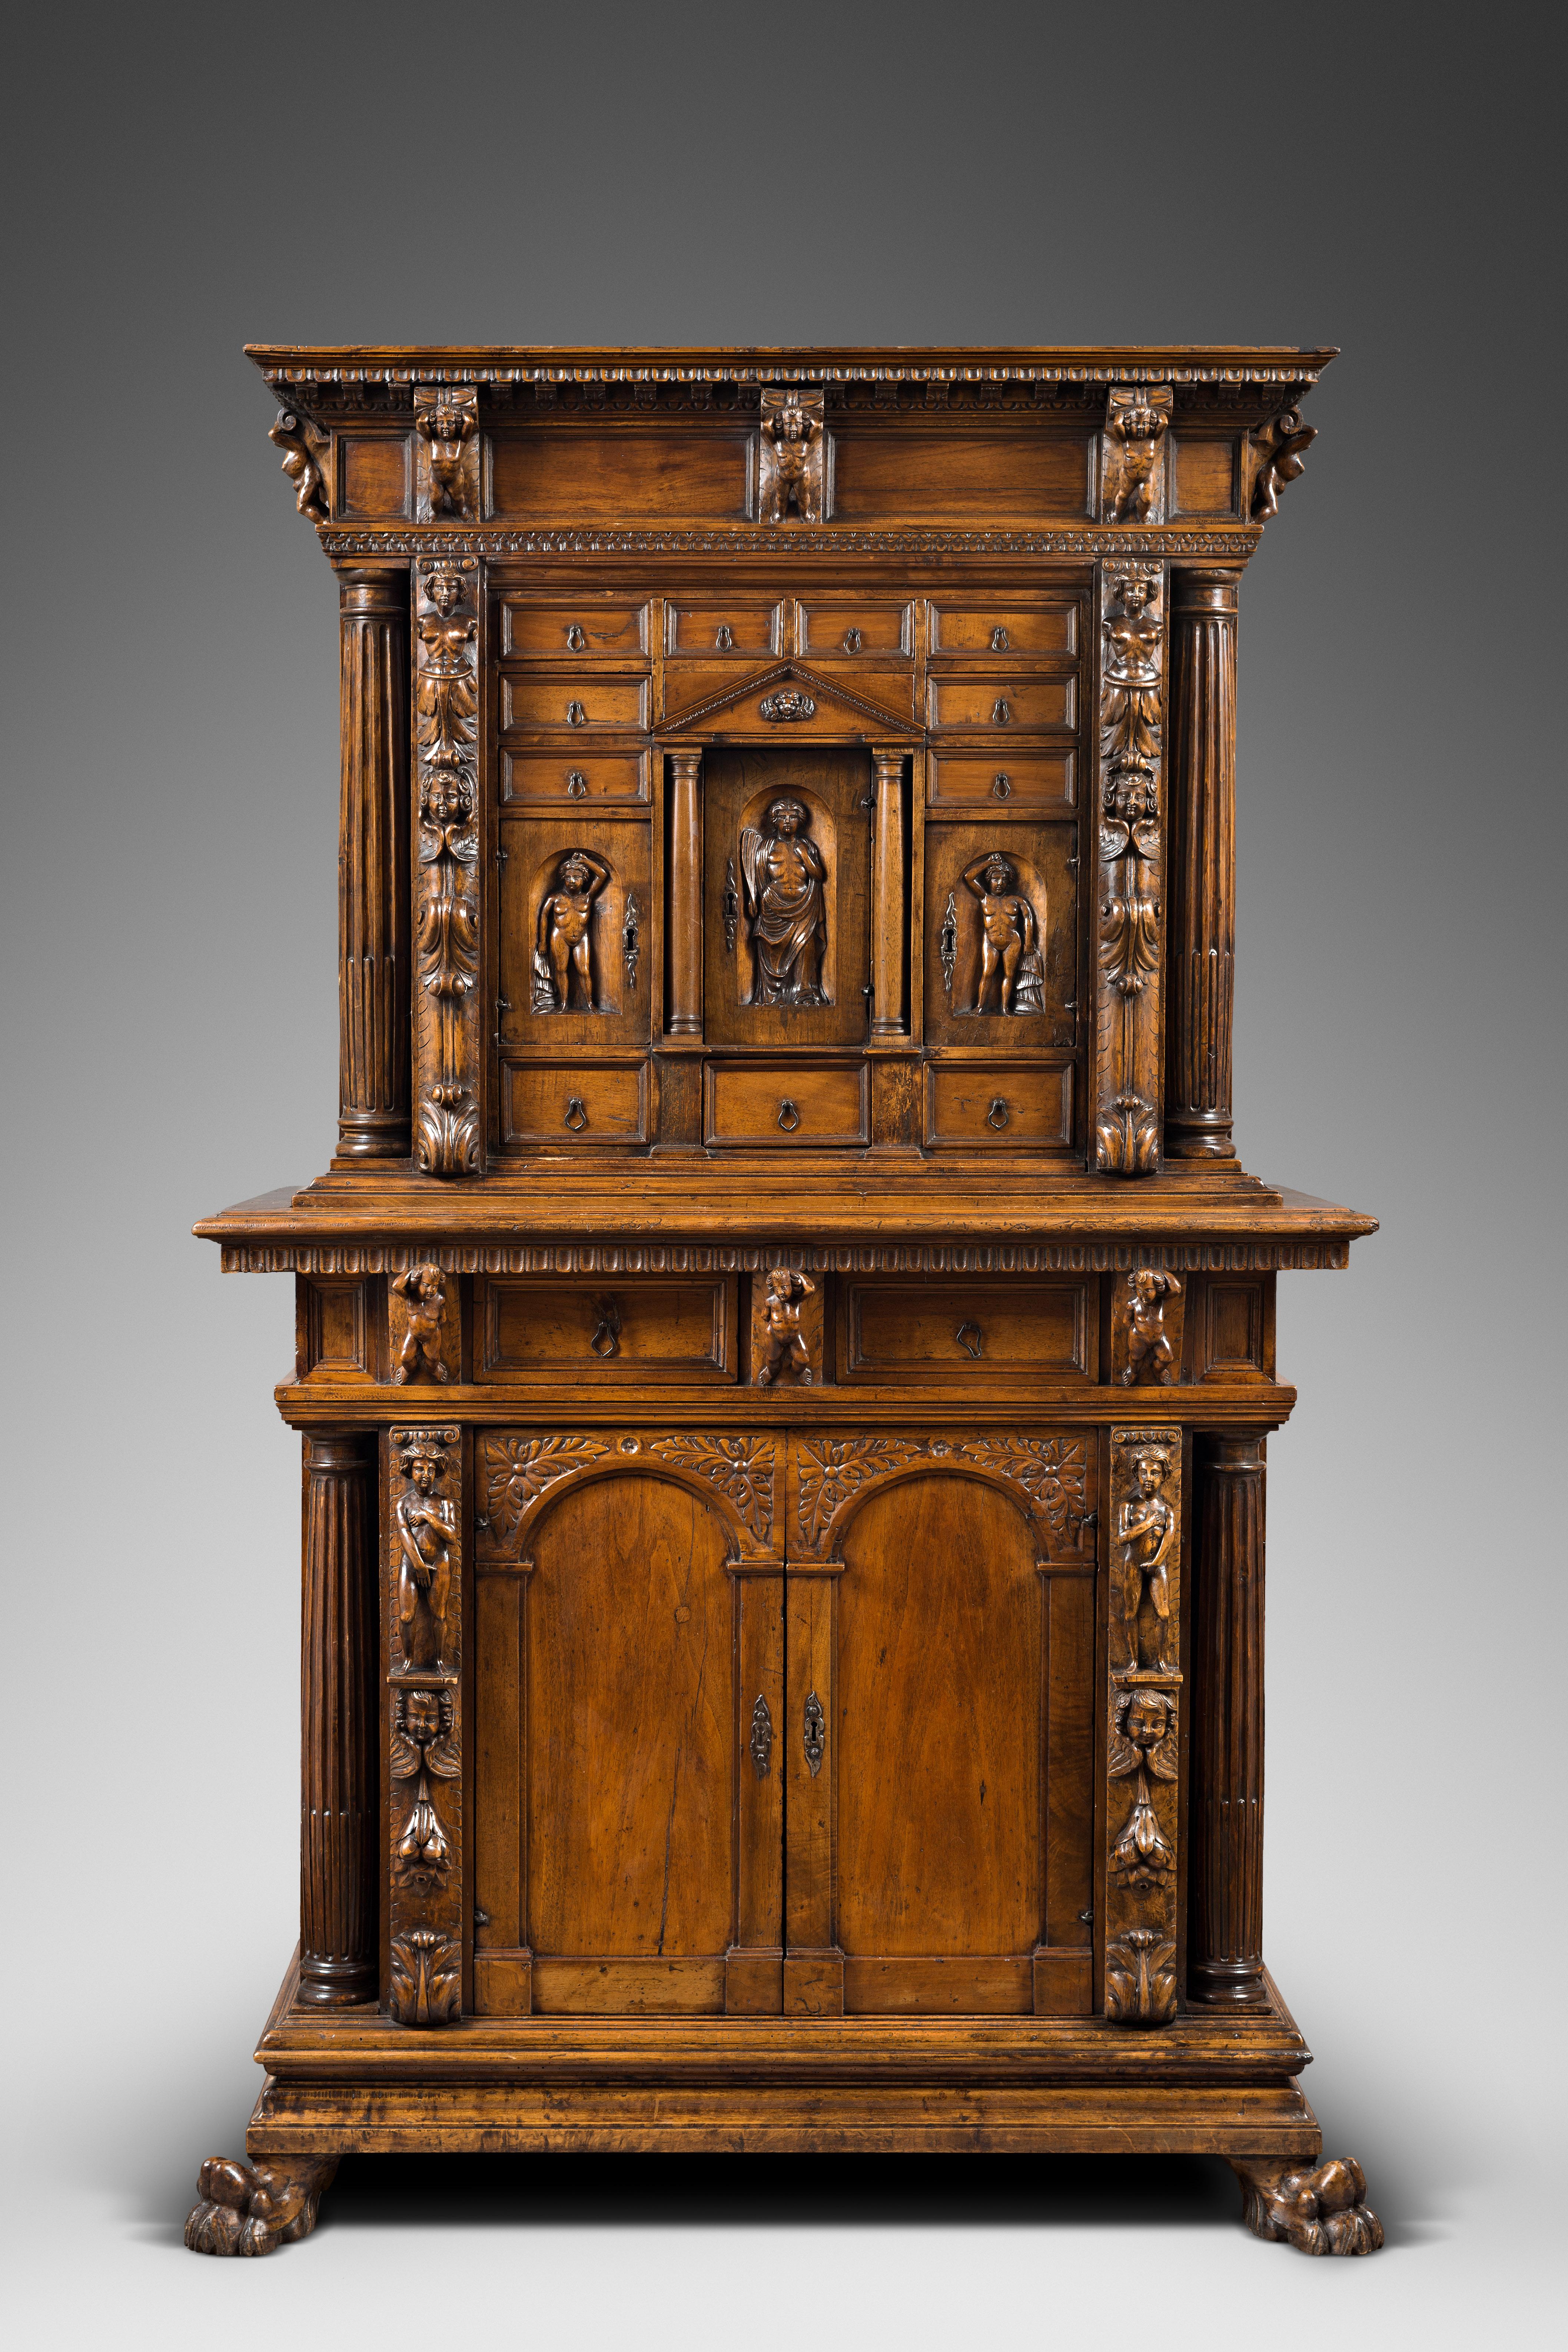 This stipo, little Italian cabinet made of walnut and walnut burl, is a remarkable example of Mannerism applied to decorative arts during the late 16th century.

While the Mannerist movement was born and developed in Florence before becoming